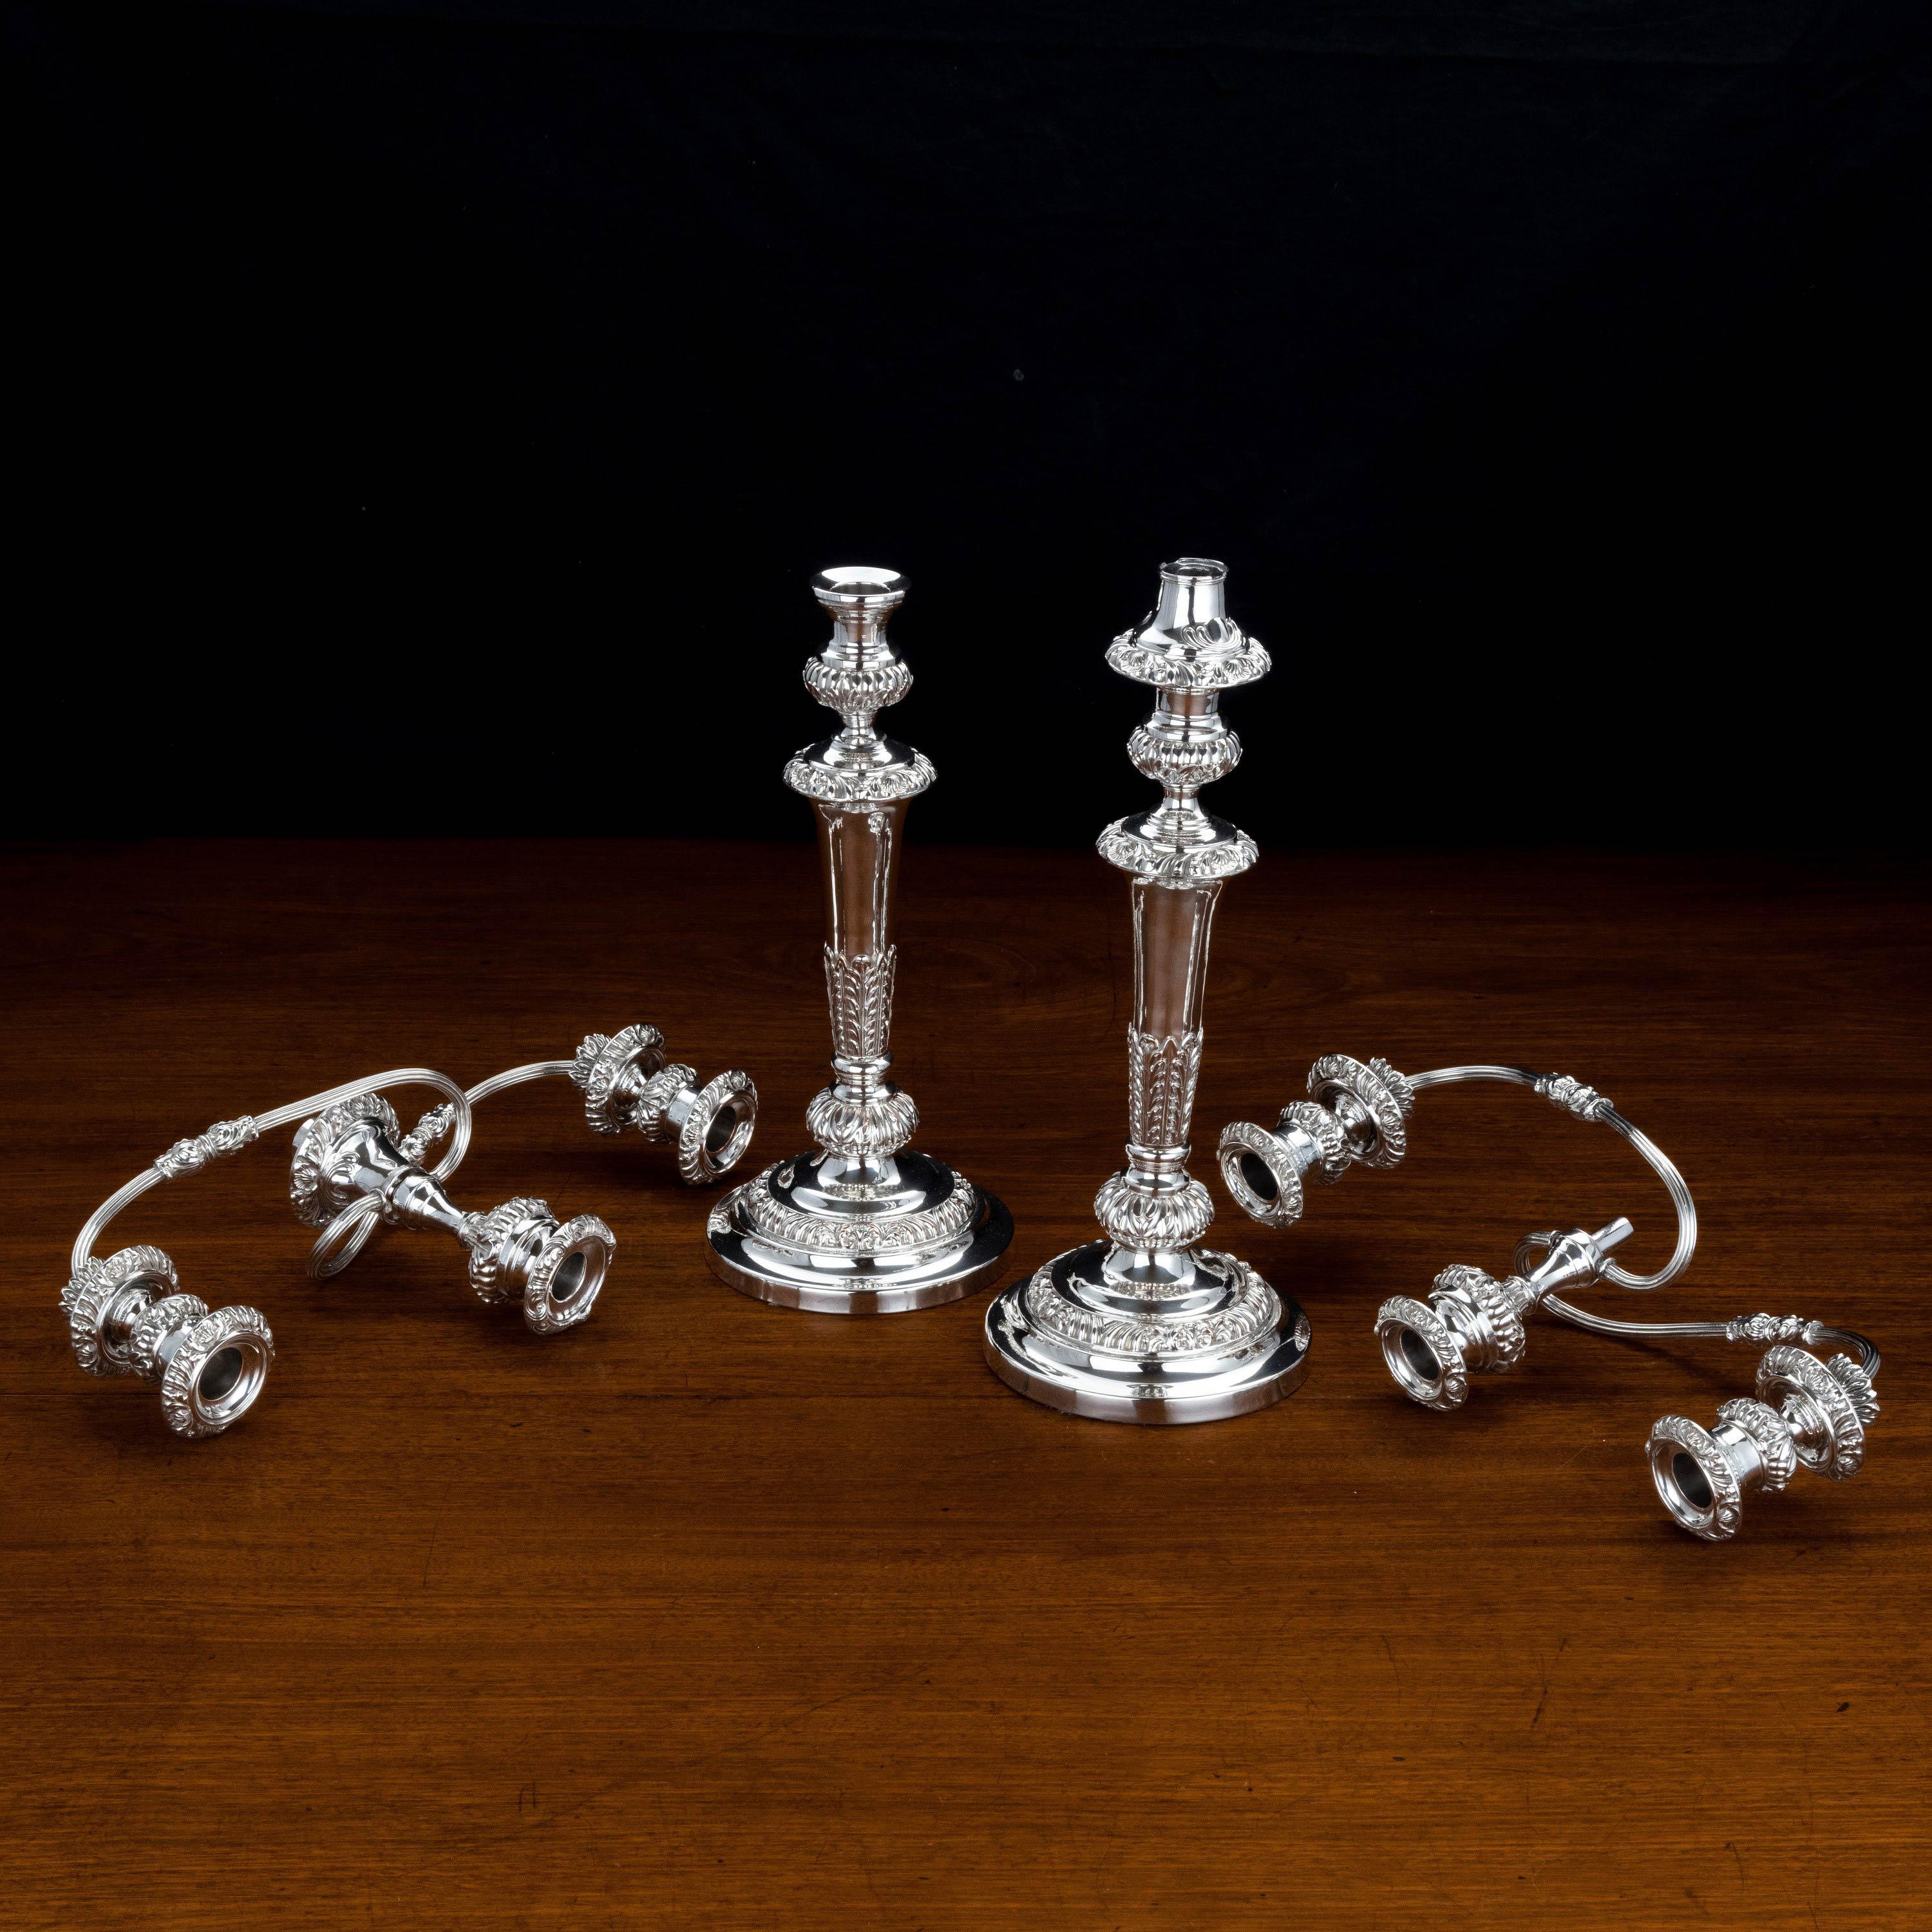 Sheffield Plate Good Pair of 19th Century Sheffield-Plated Candelabra